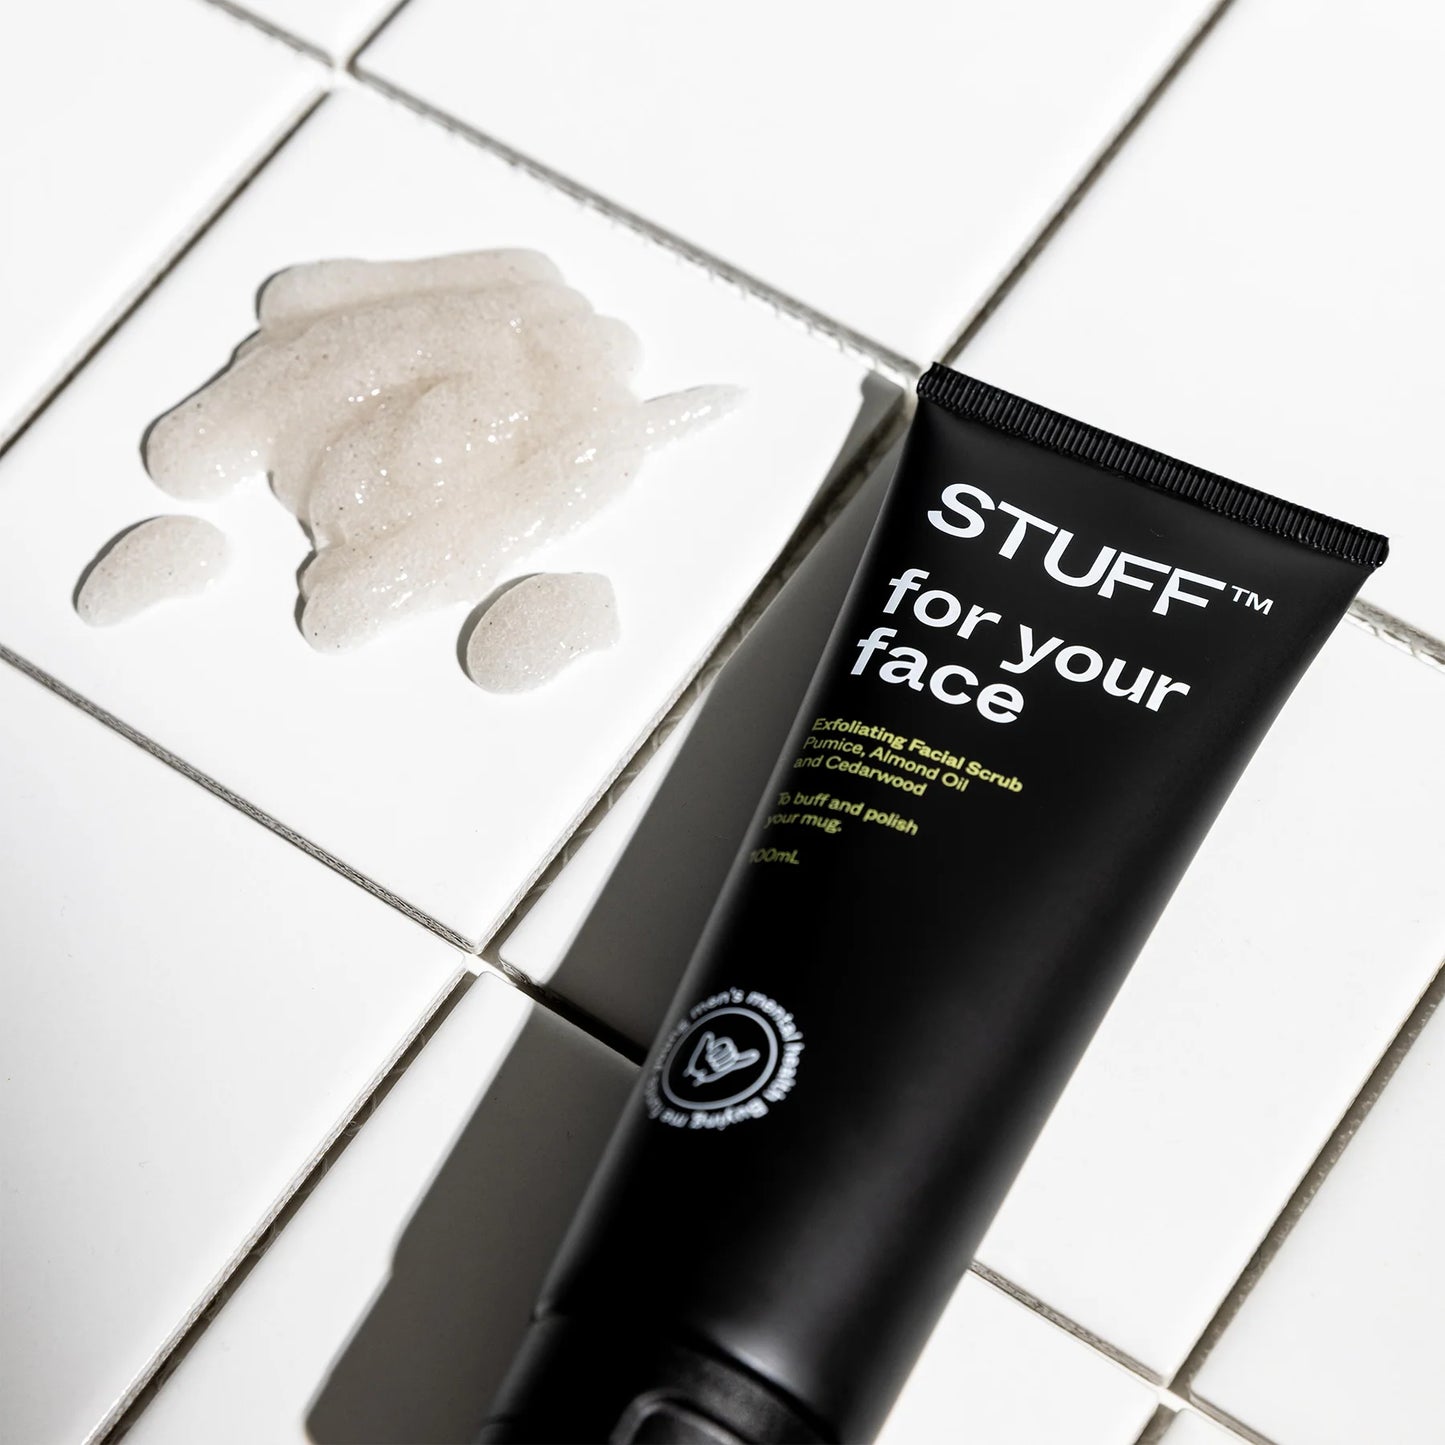 Stuff - For your face, Face Scrub